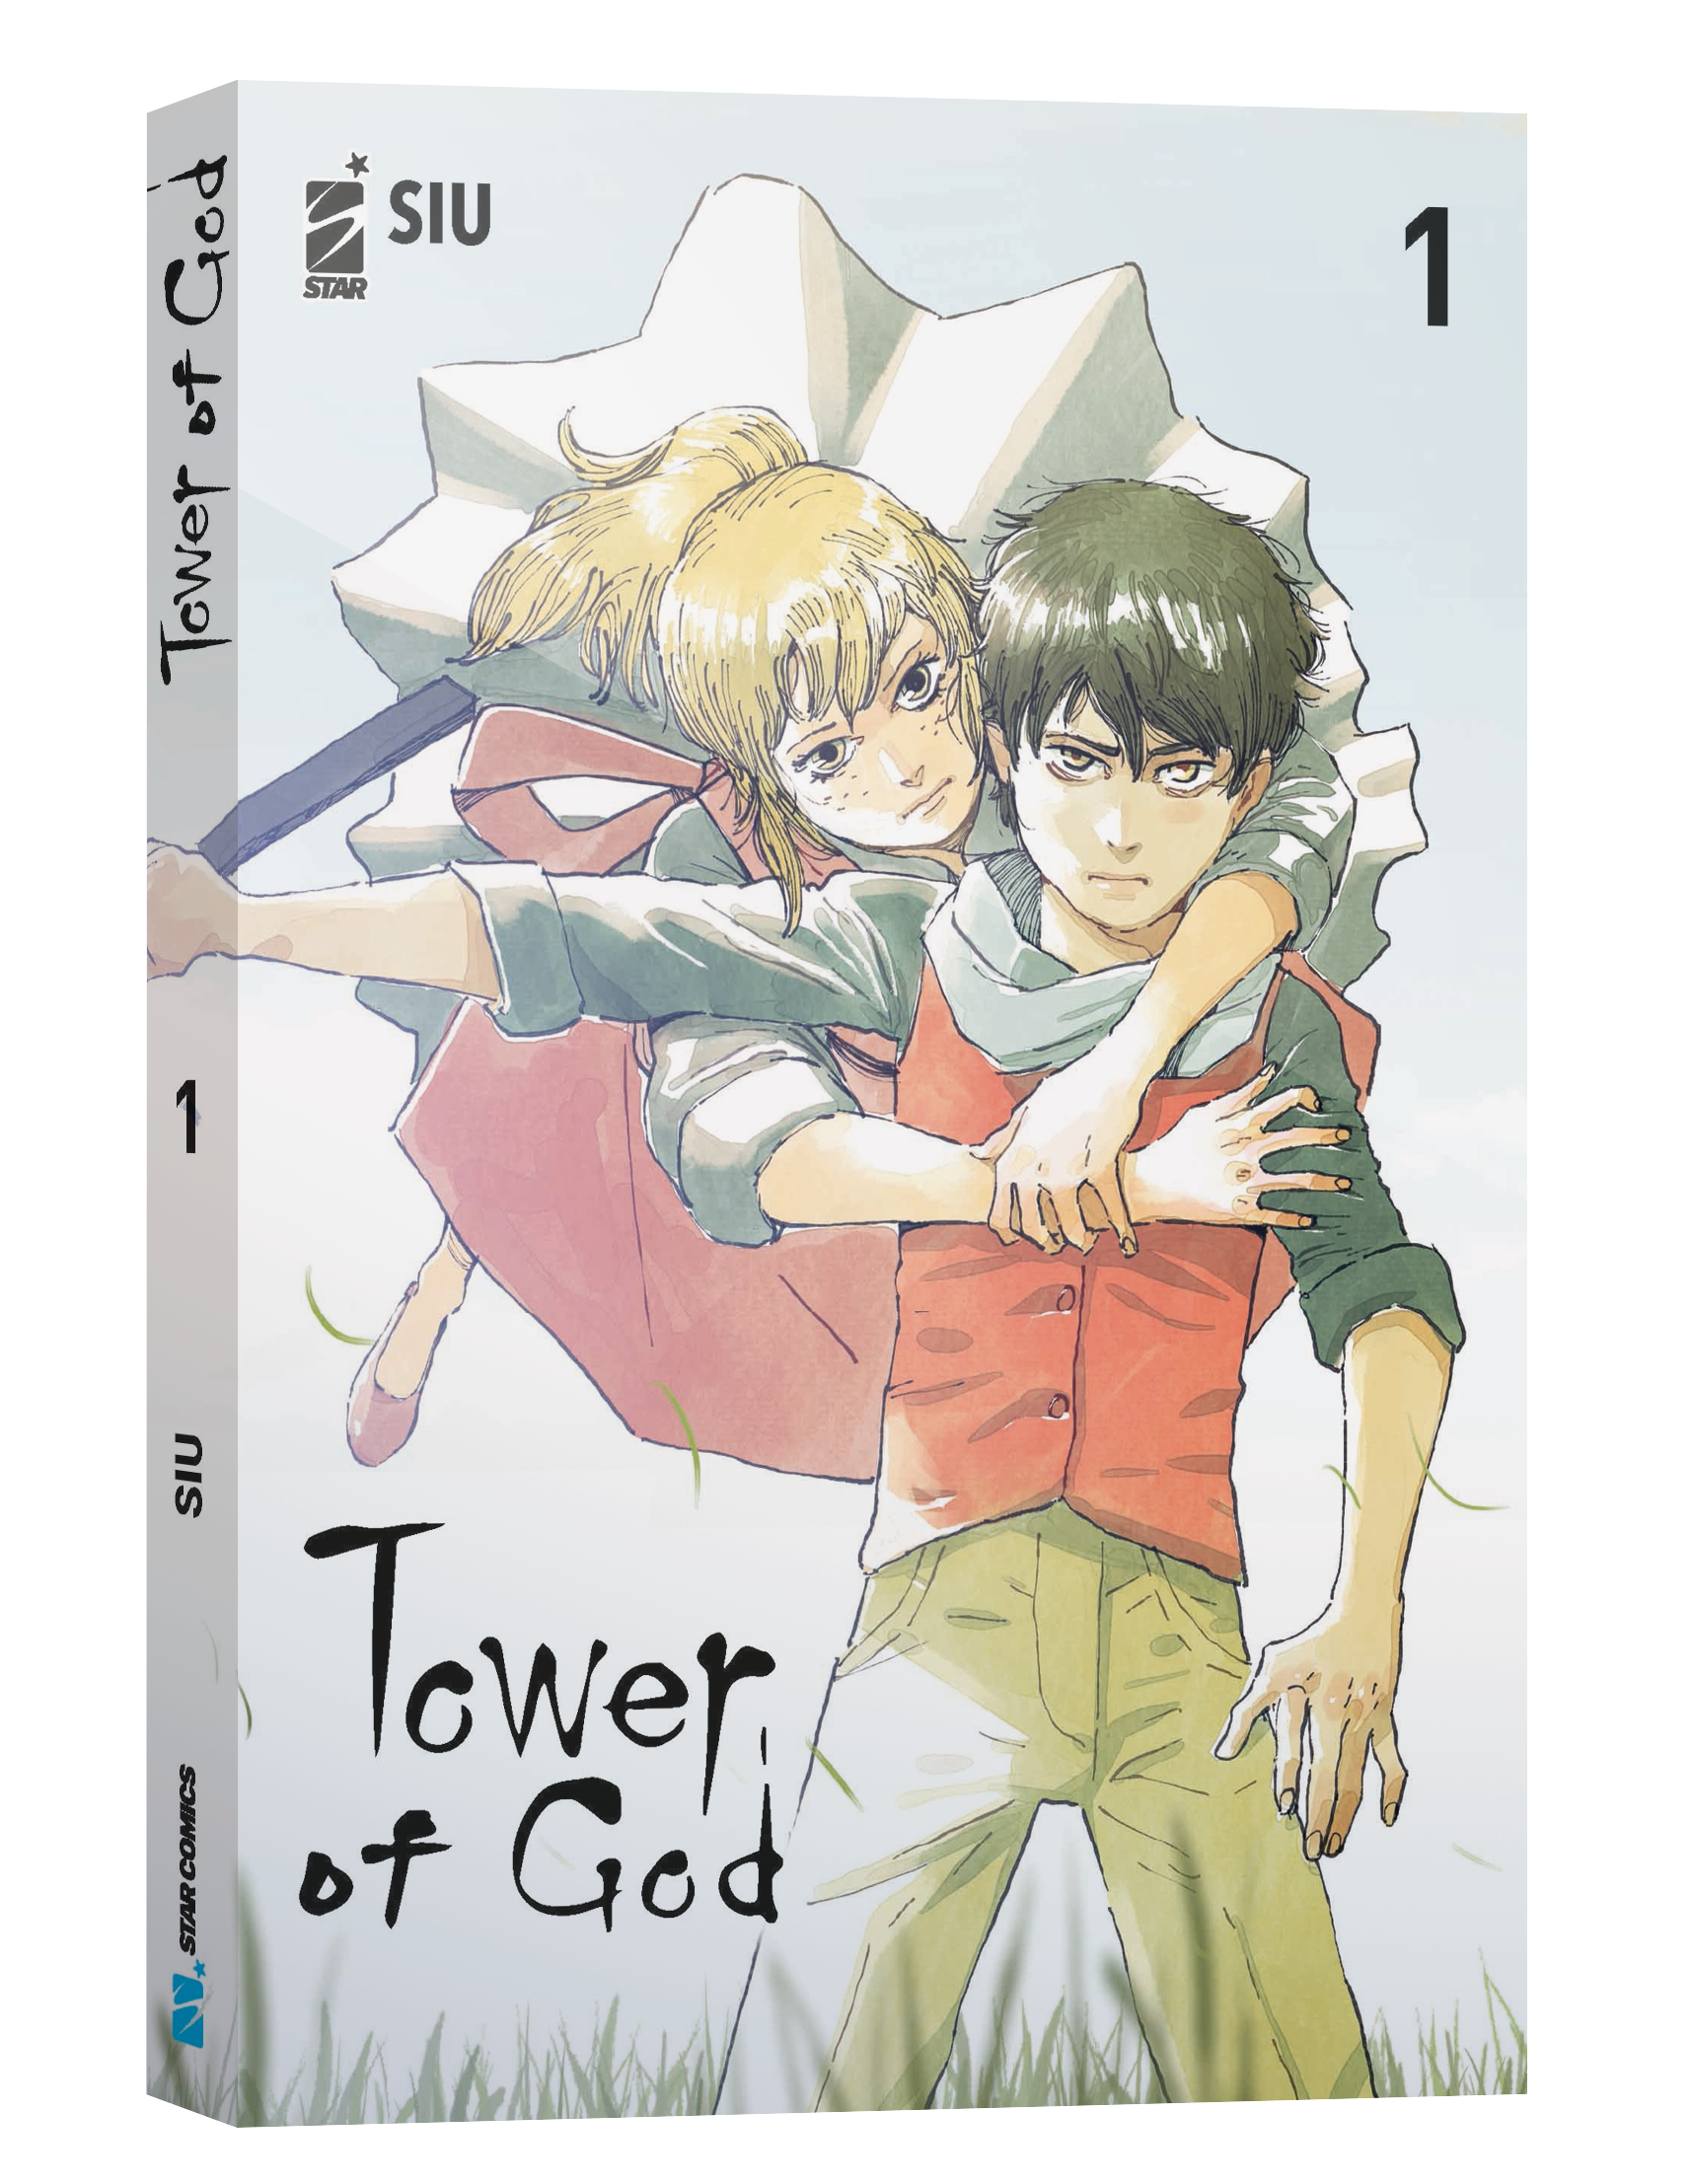 TOWER OF GOD N. 1 VARIANT COVER EDITION